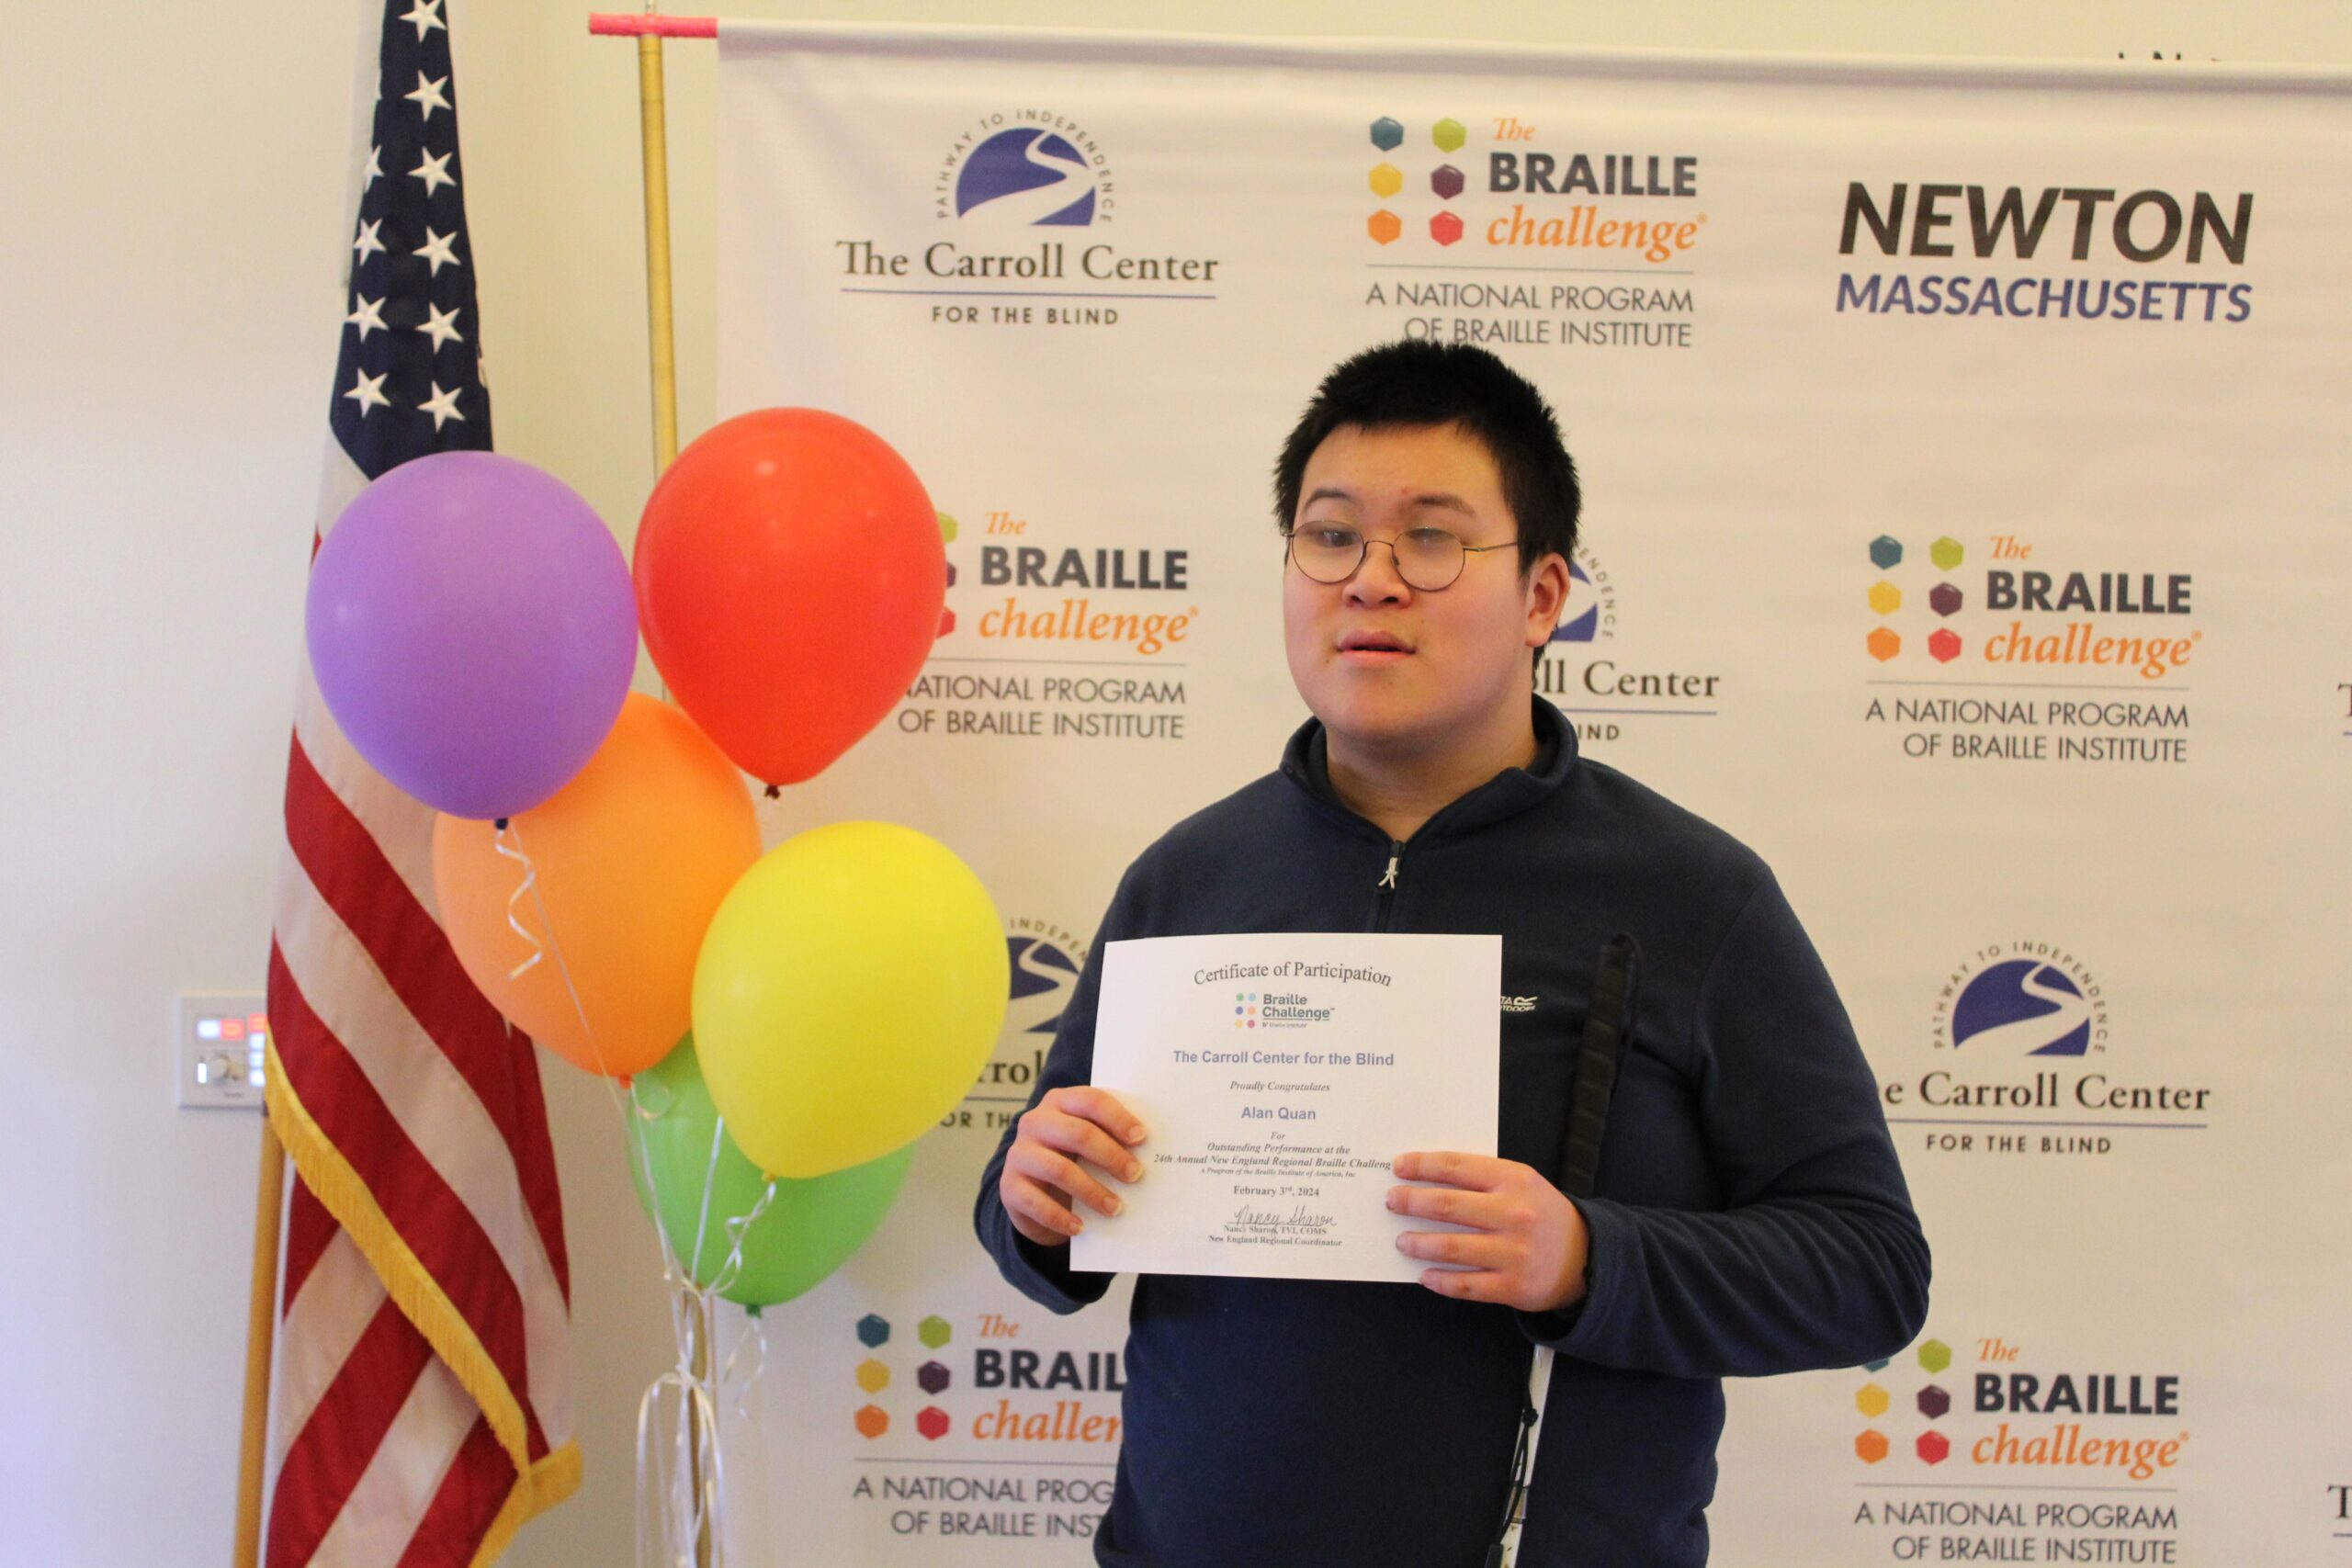 Braille Challenge participant smiling for a photo with a certificate in front of the Carroll Center Braille Challenge backdrop